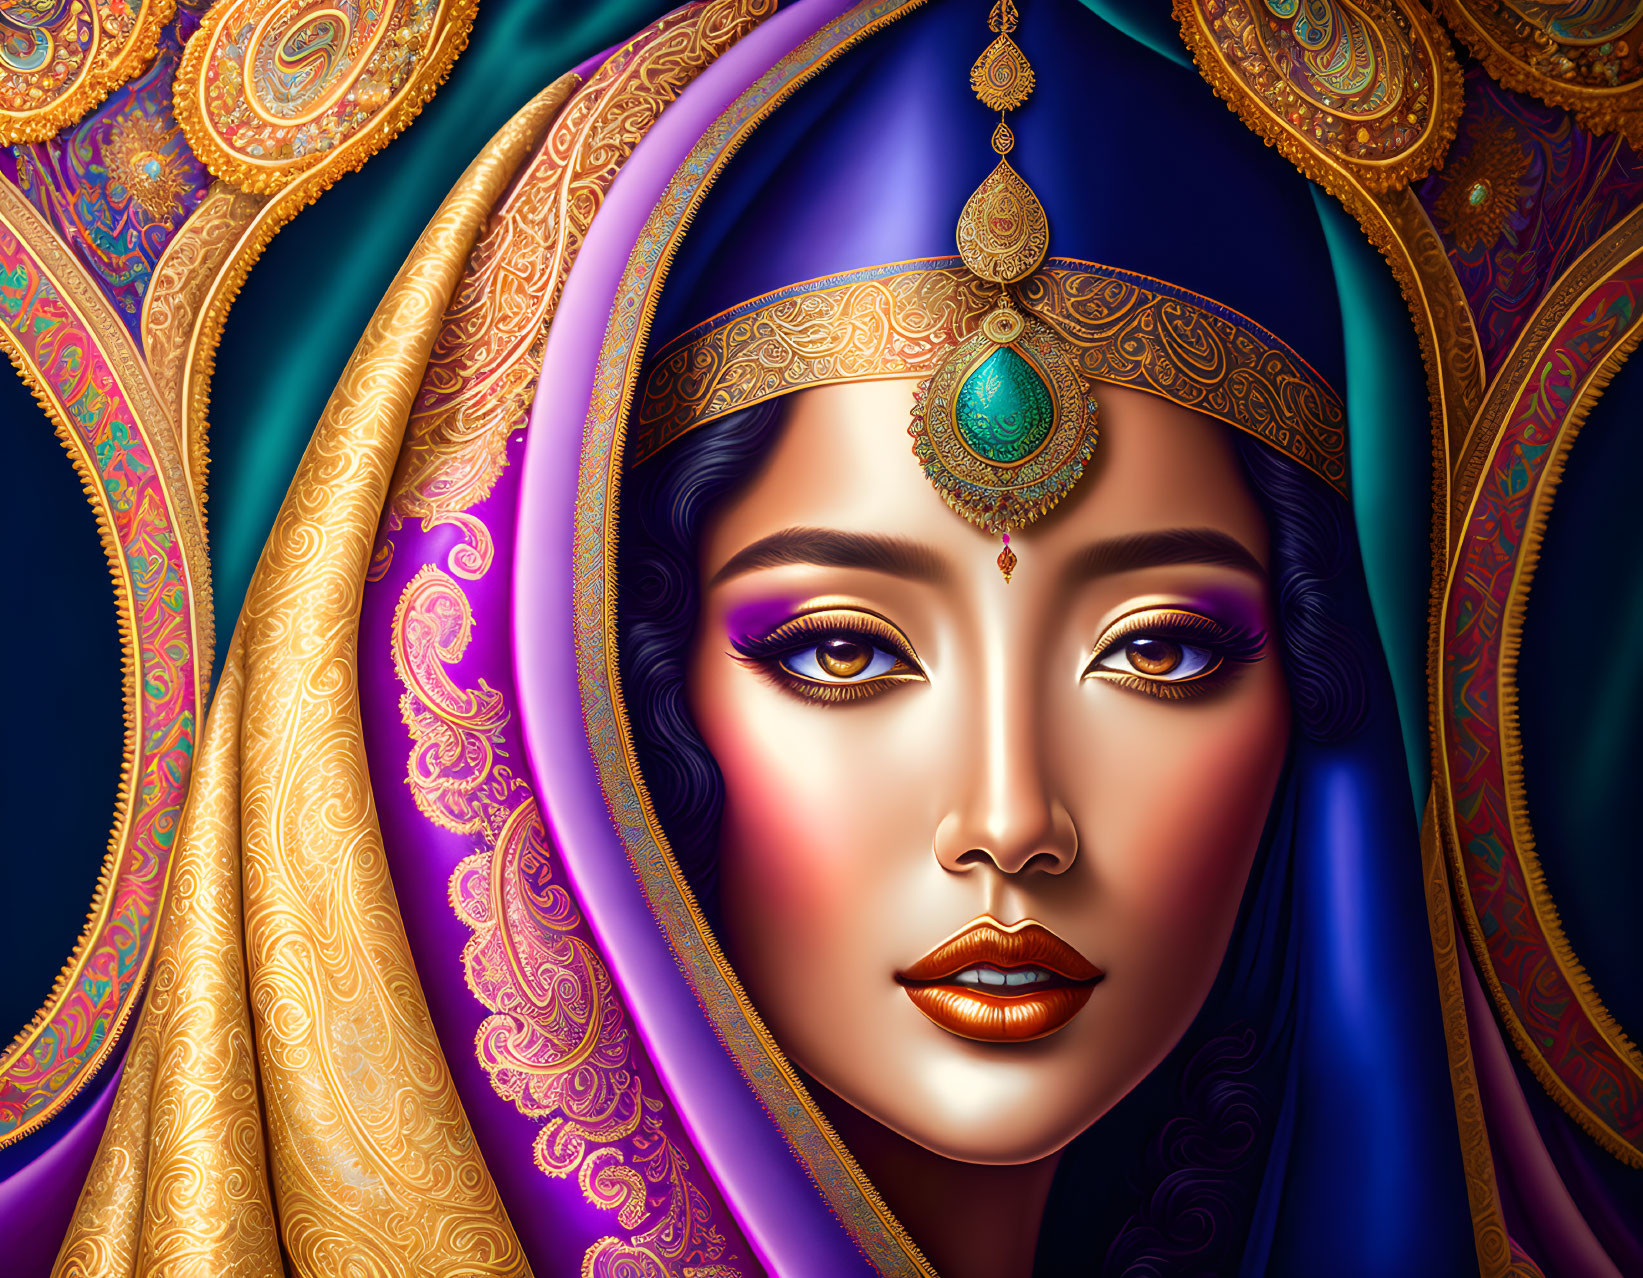 Illustrated portrait of woman in blue and gold sari with ornate headpiece